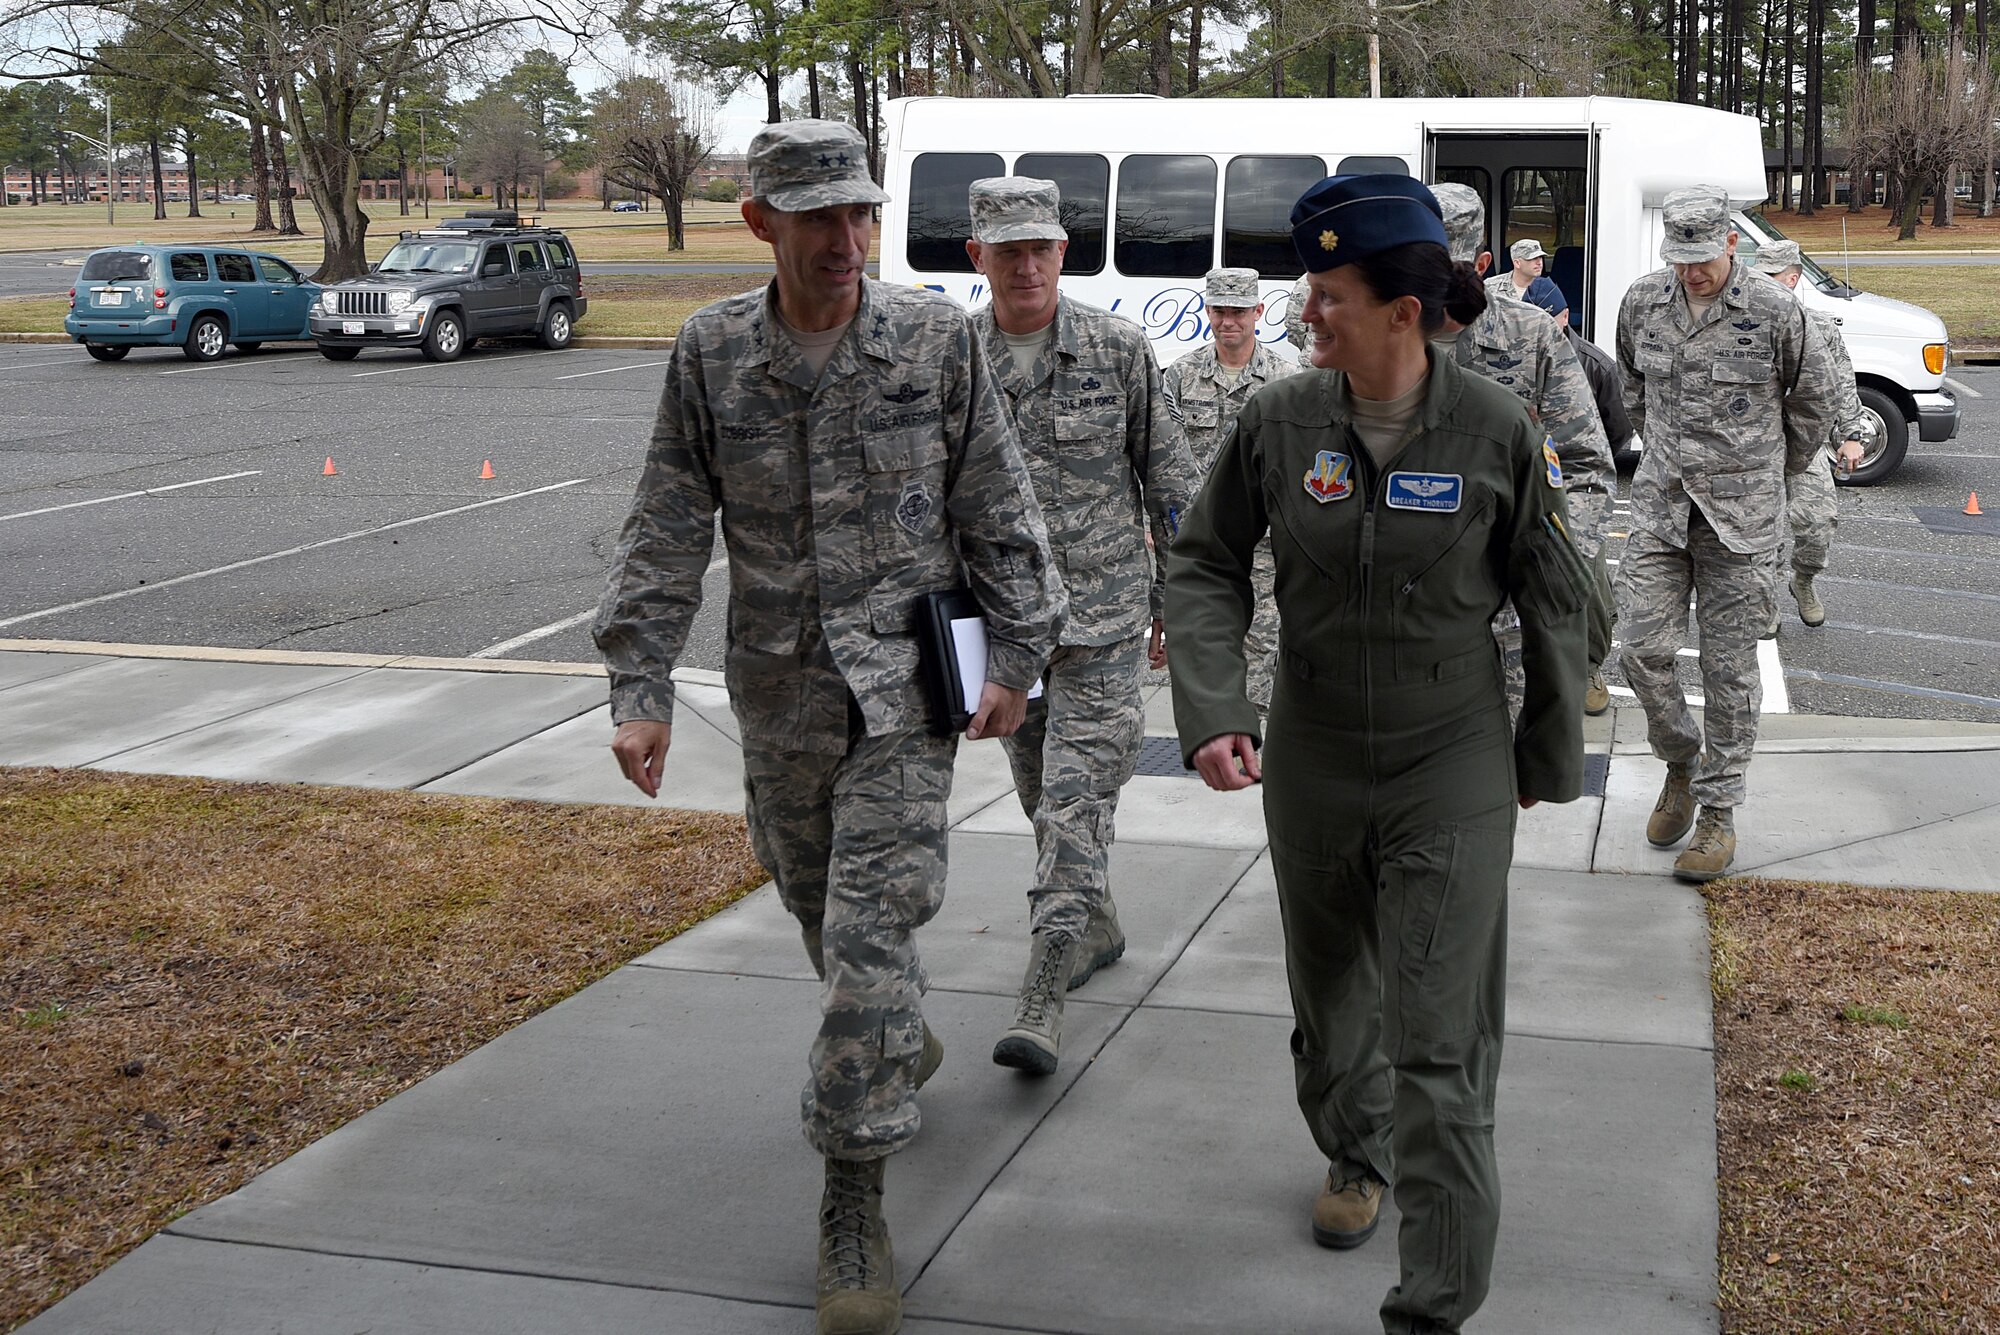 Members of 9th Air Force and Team Seymour leadership walk to the newly built 4th Operations Support Squadron Weapons and Tactics Razor Talon War Room at Seymour Johnson Air Force Base, N.C., Feb. 15, 2017. The War Room will enhance communications and other capabilities during future exercises such as Razor Talon an exercise that began in 2013 and was developed at Seymour Johnson AFB to combine land, air and sea forces for joint unit participation and collaboration. (U.S. Air Force photo by Airman 1st Class Kenneth Boyton)